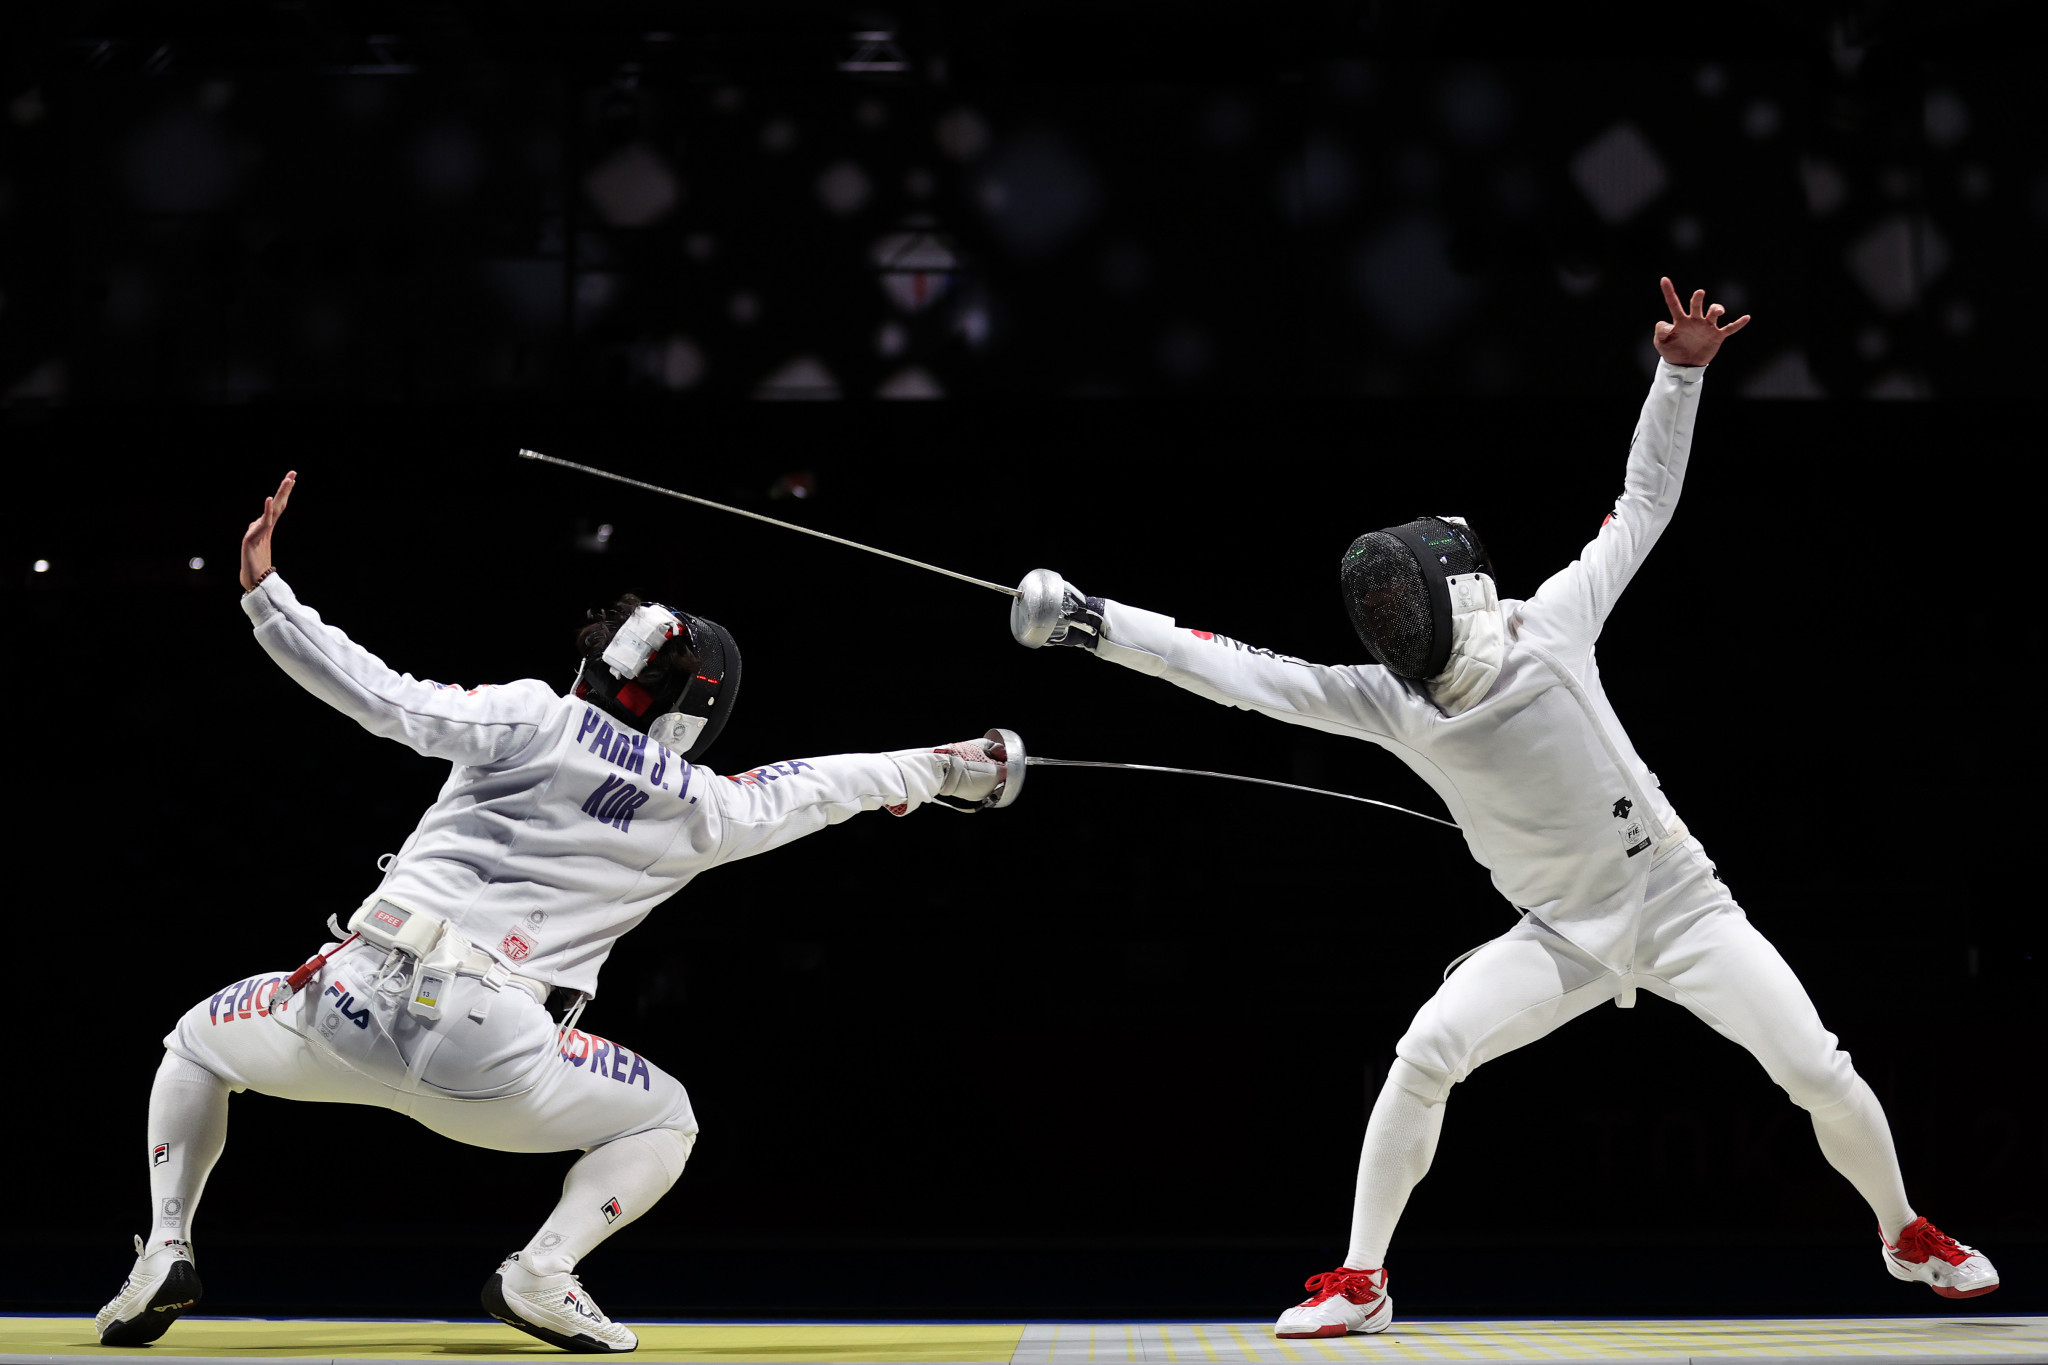 Kano and Shi secure success in Seoul at Asian Fencing Championships